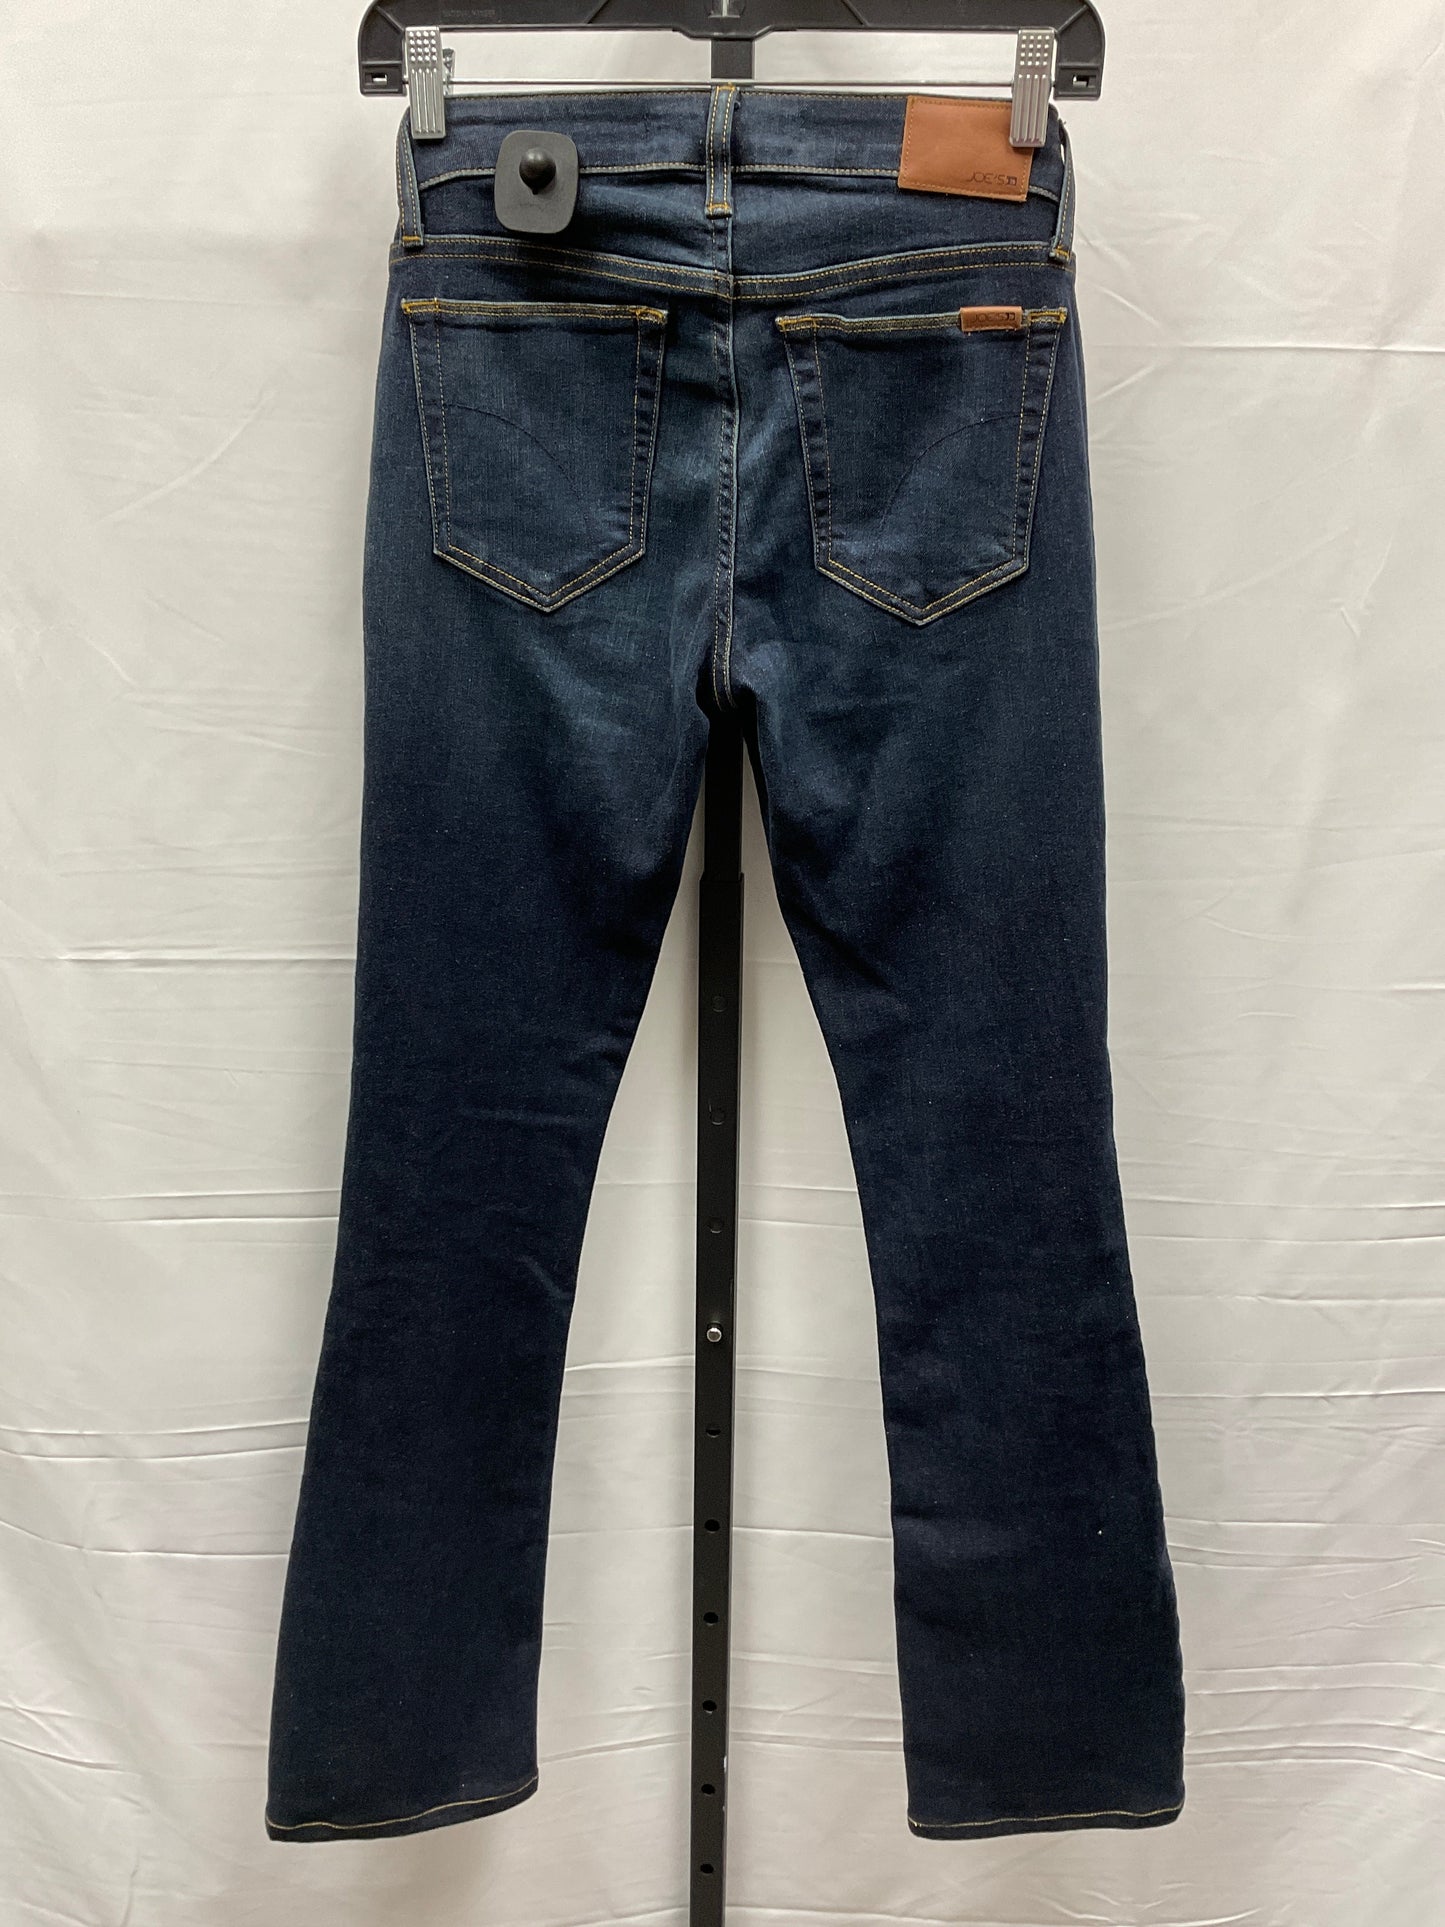 Jeans Designer By Joes Jeans  Size: 0